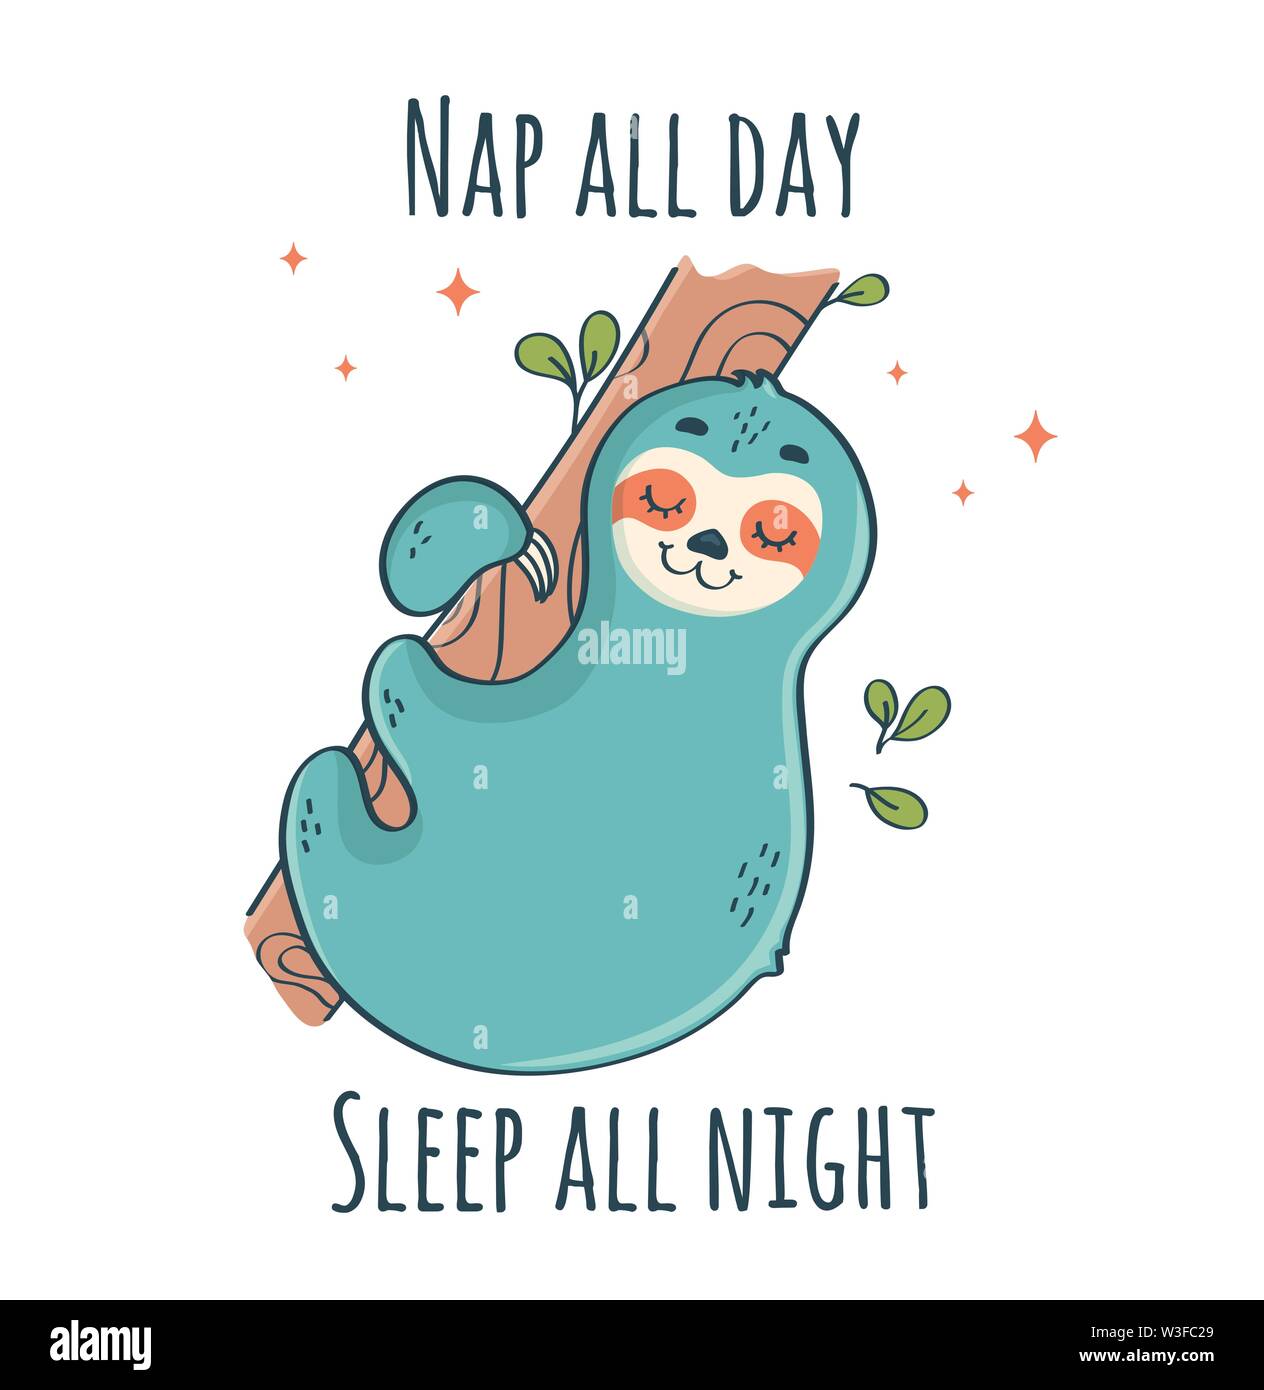 Sloth sleeping on the tree isolated on white background. Cute vector illustration with funny phrase - Nap all day Sleep all night. Stock Vector